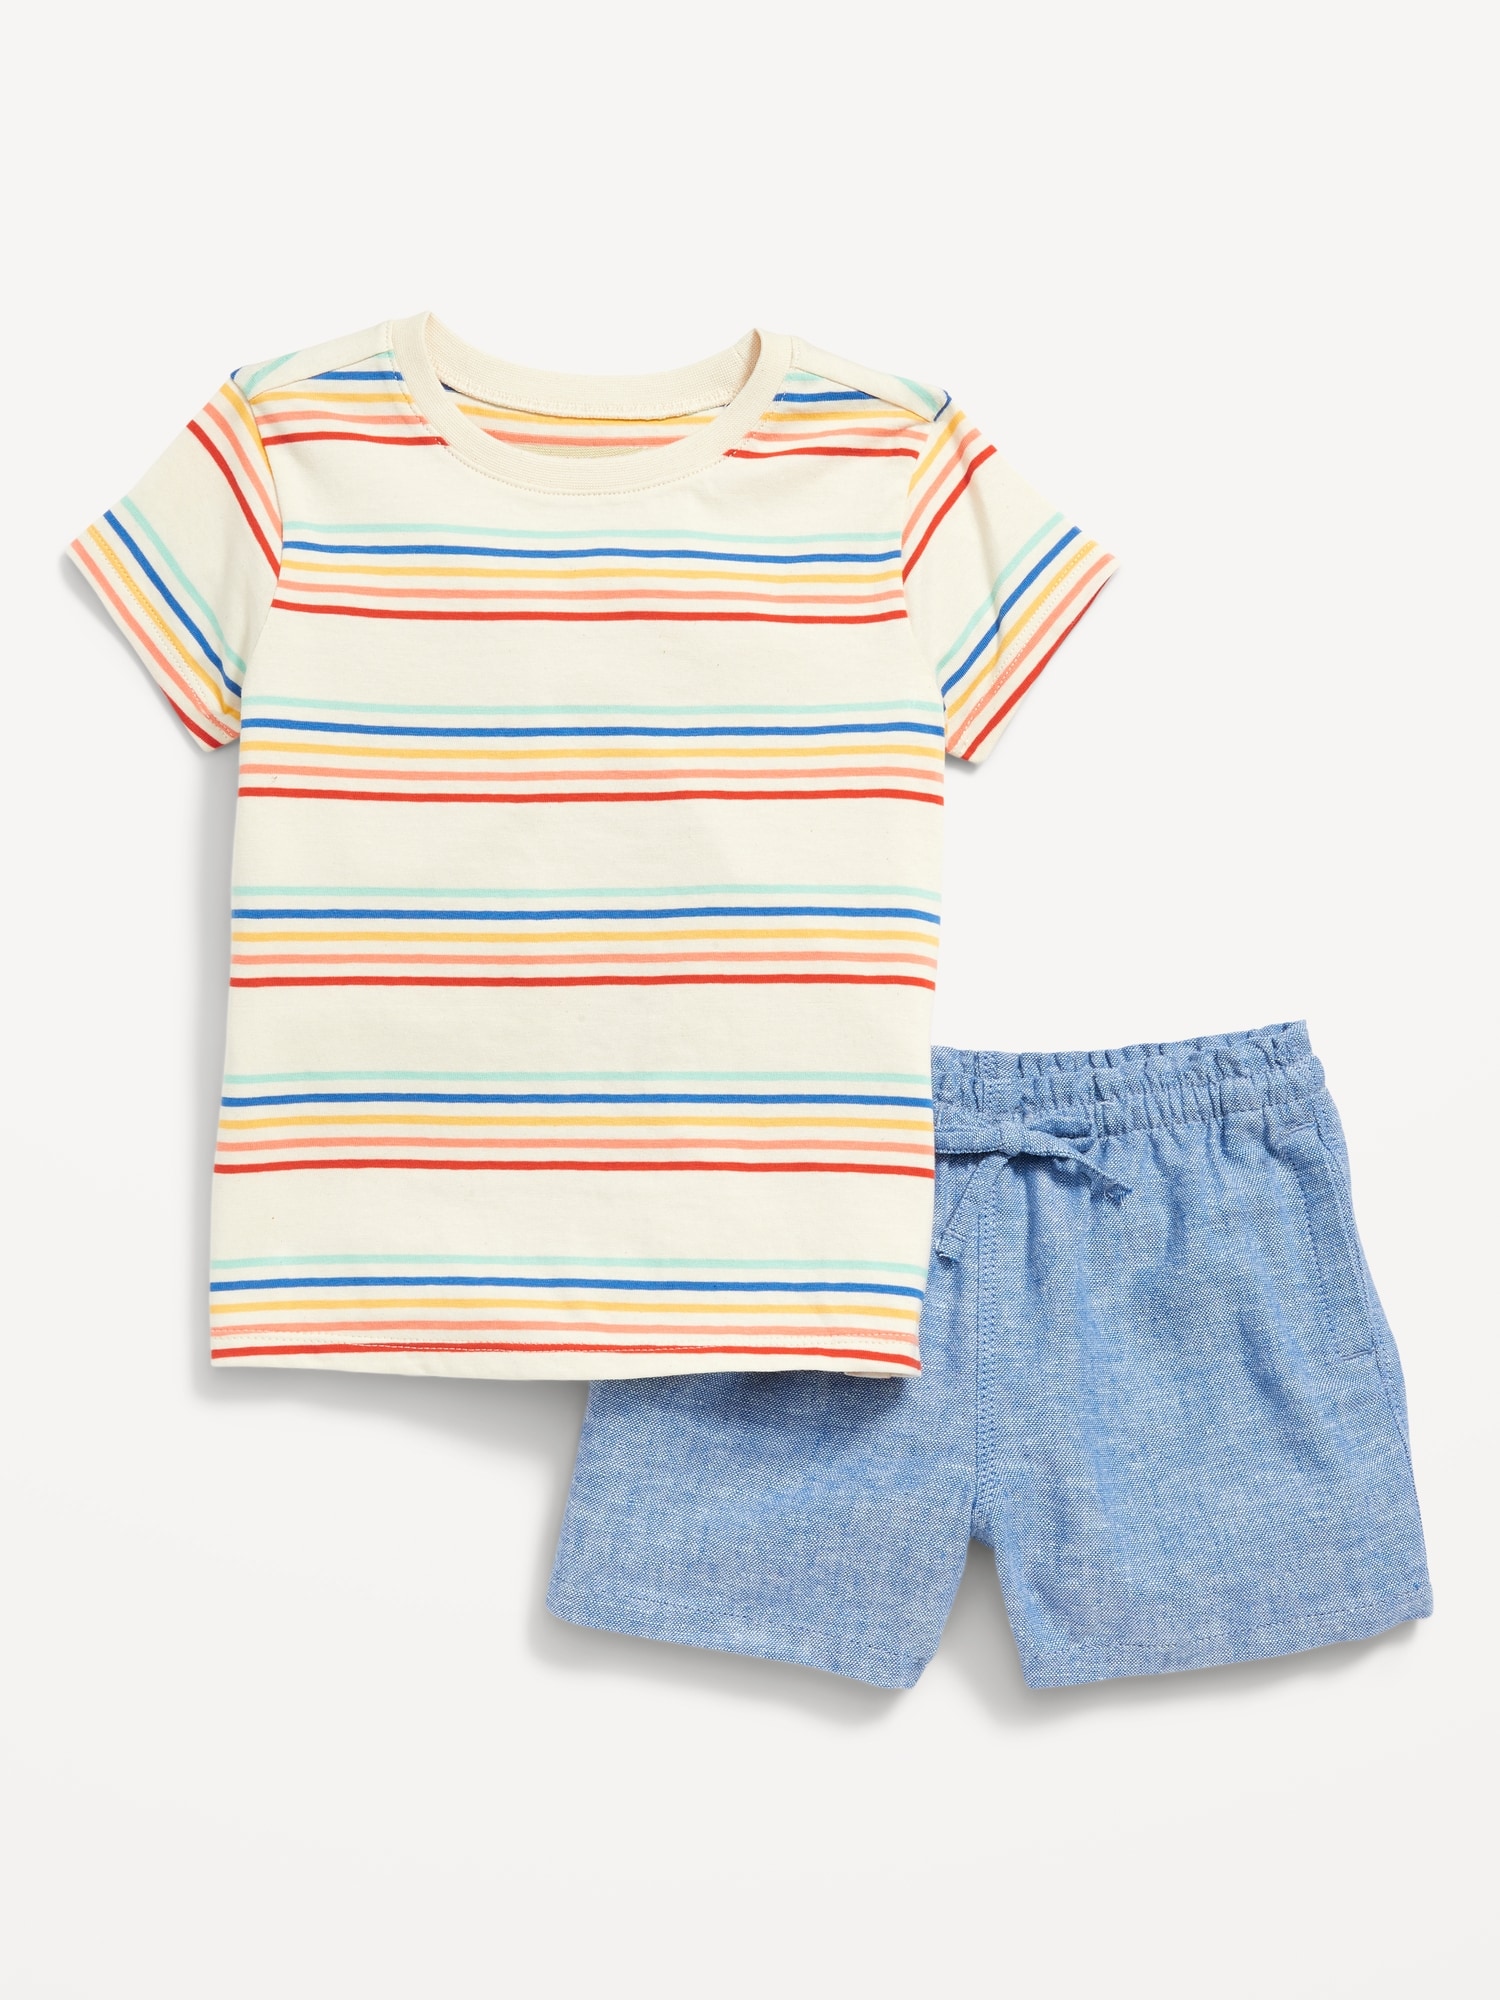 Printed Crew-Neck T-Shirt & Pull-On Shorts for Toddler Girls